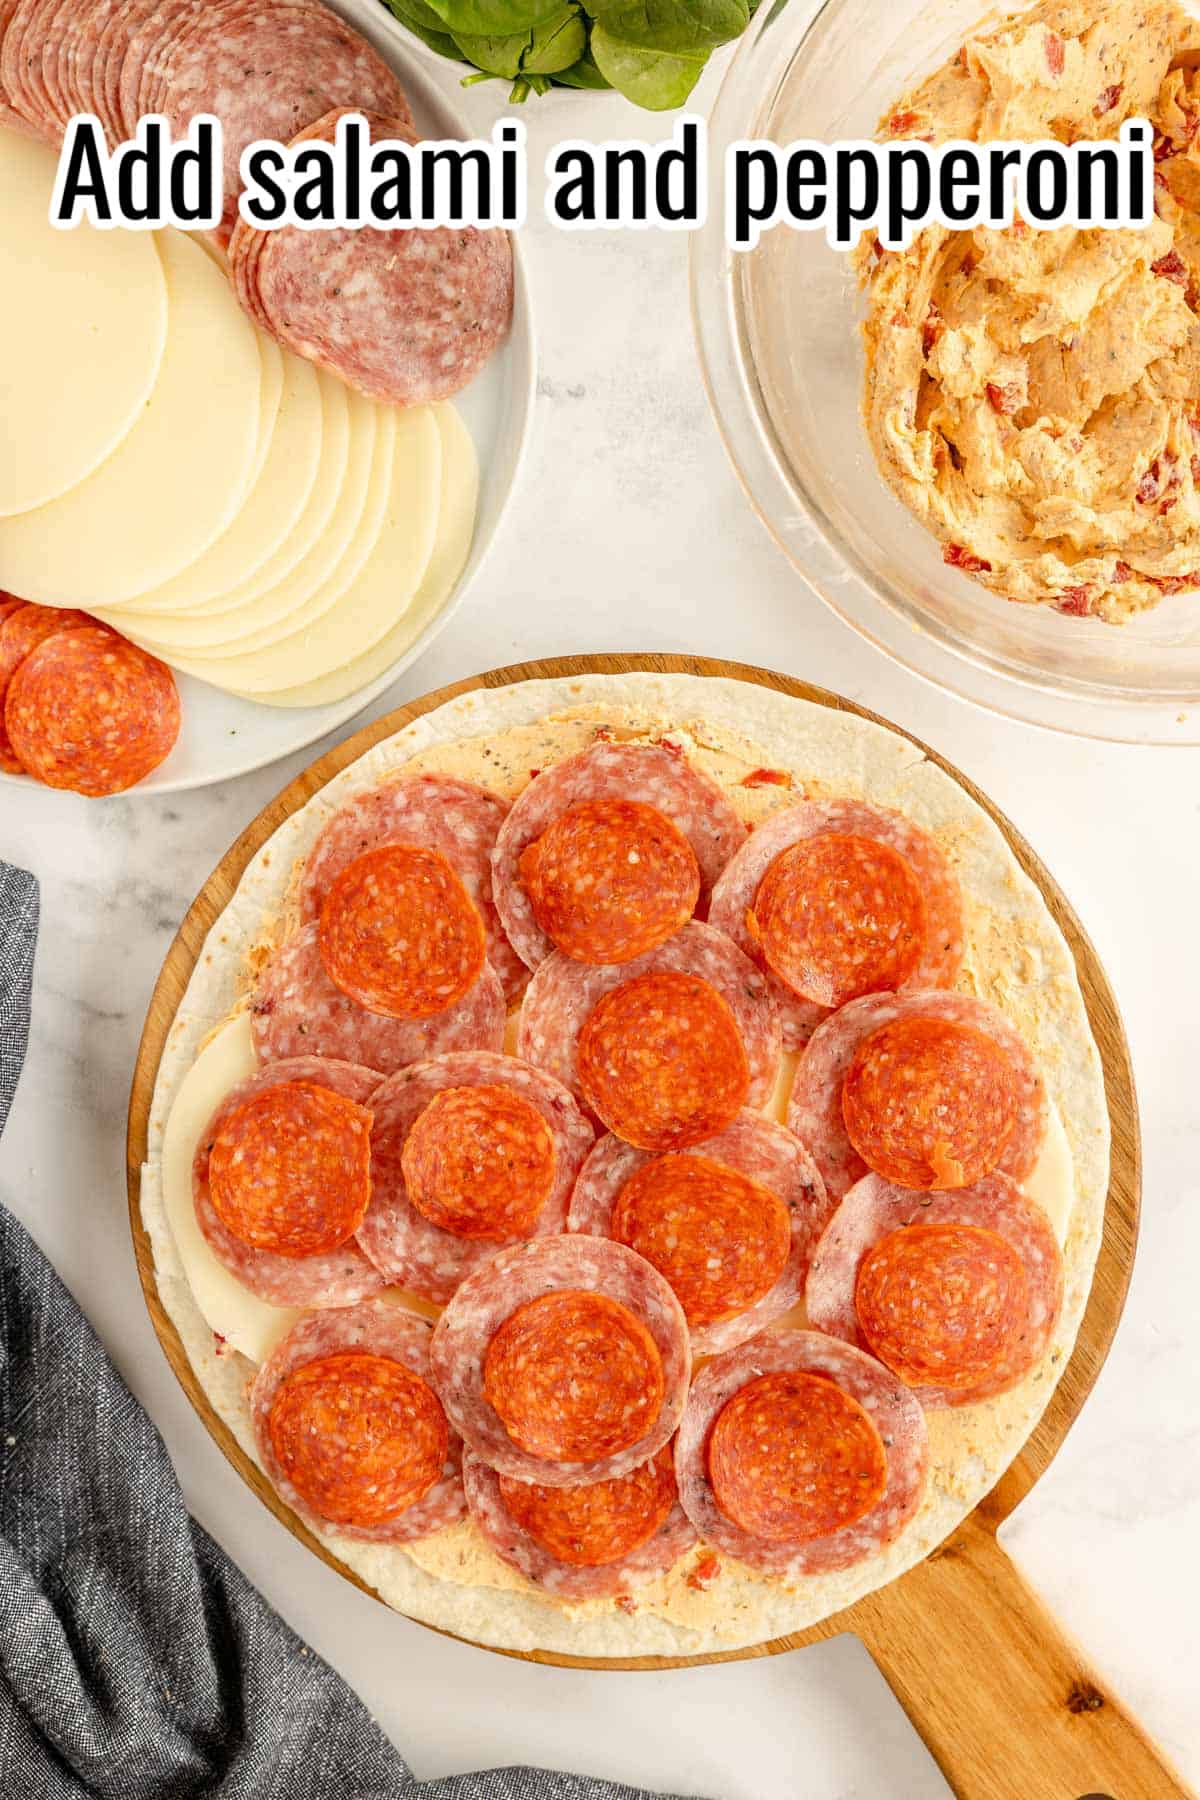 A tortilla with salami and pepperoni laid on top.